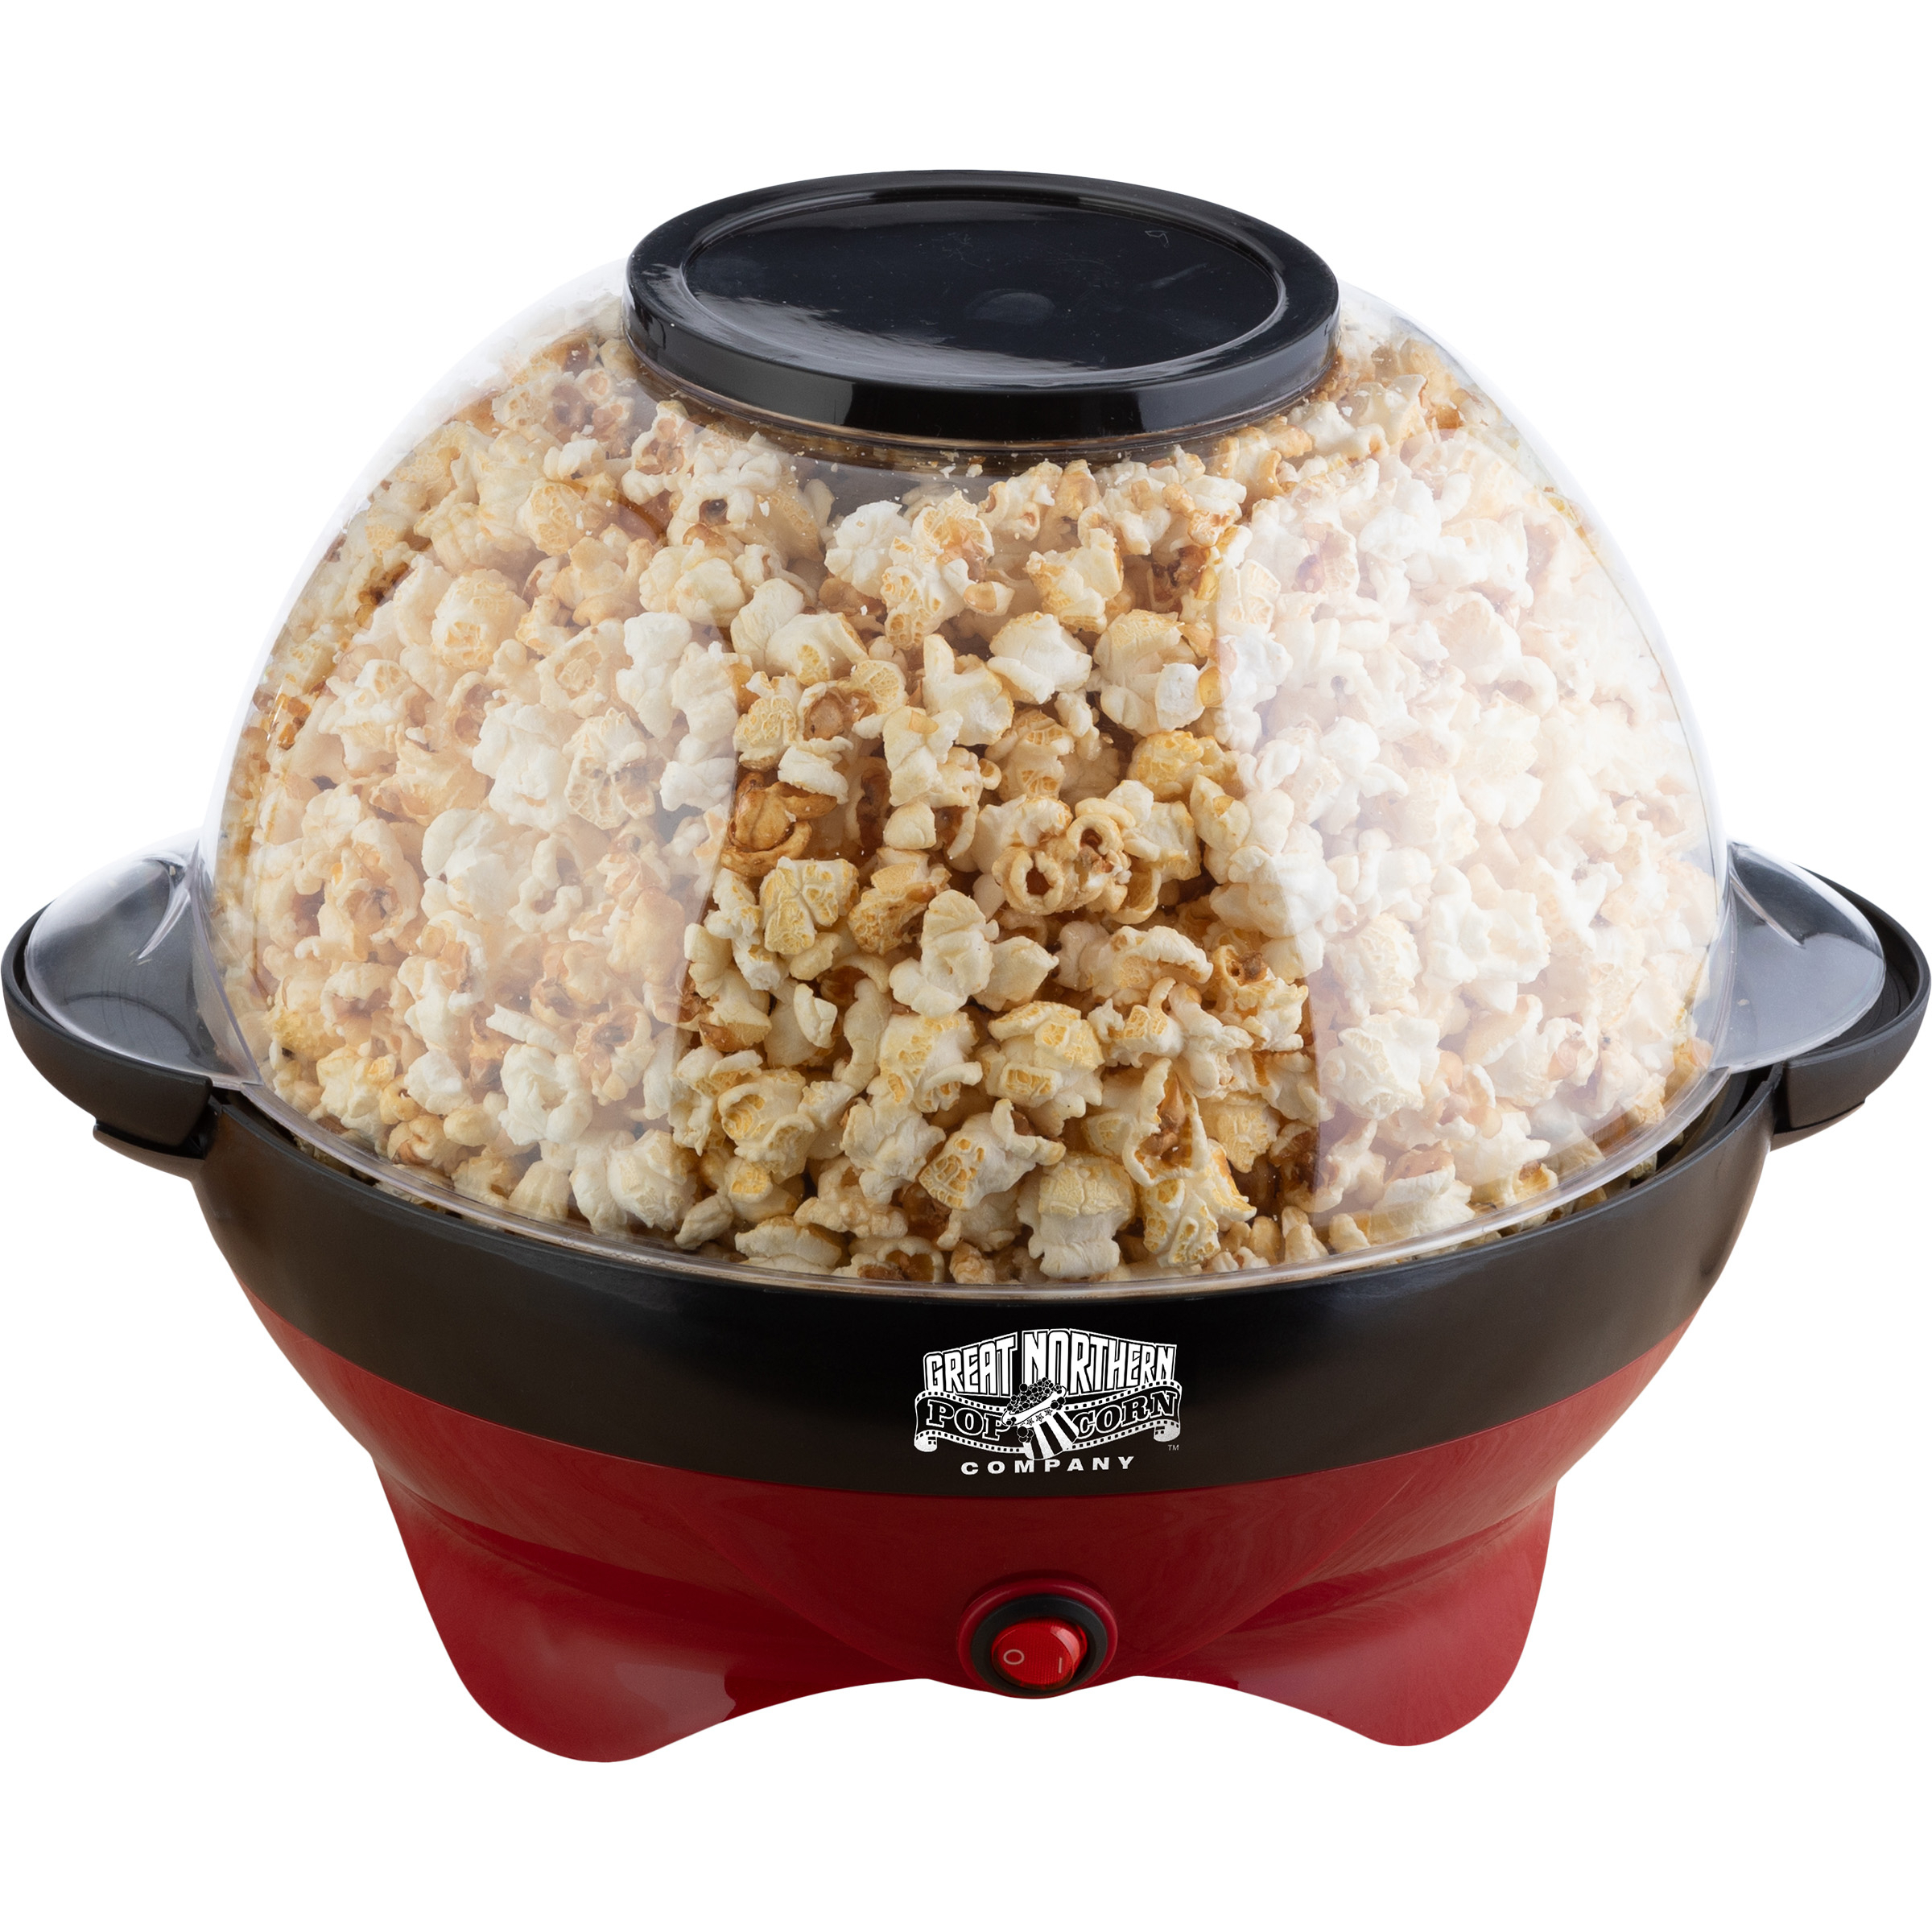 Electric Pop And Stir Popcorn Maker Machine With Built-In Stirrer And Serving Bowl - Red